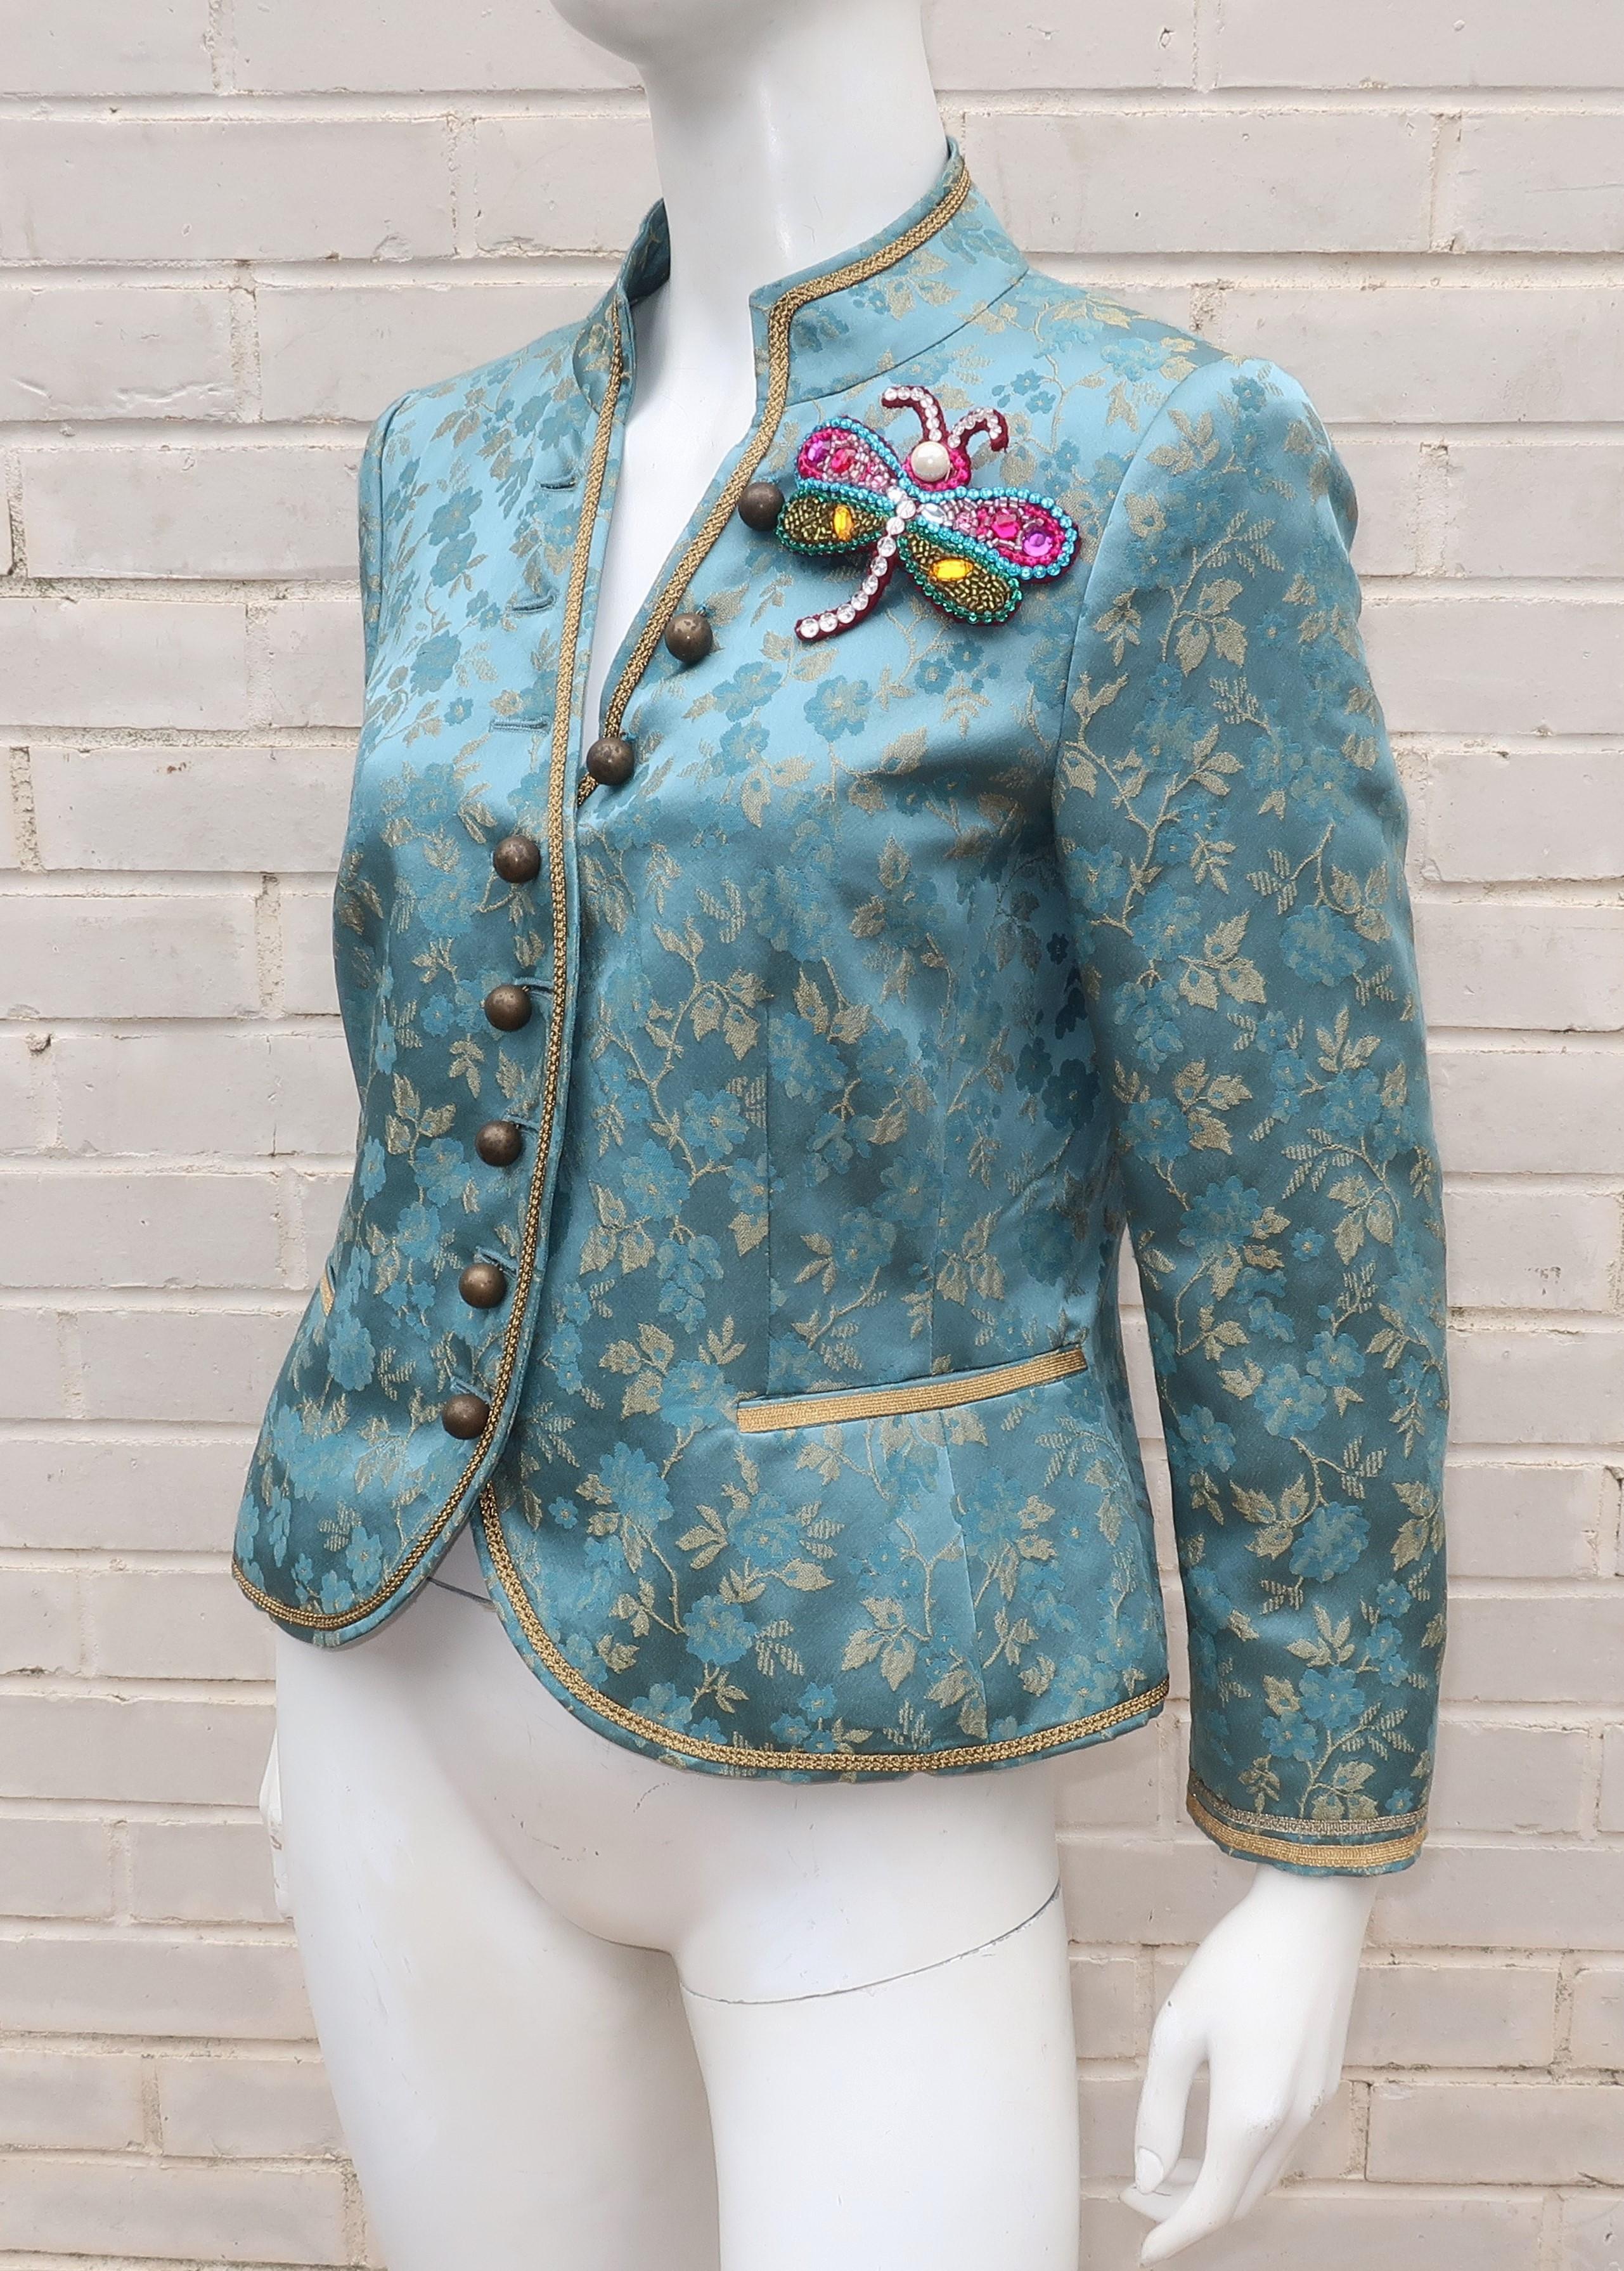 Moschino ‘Bollywood’ Brocade Jacket With Dragonfly Motif 3